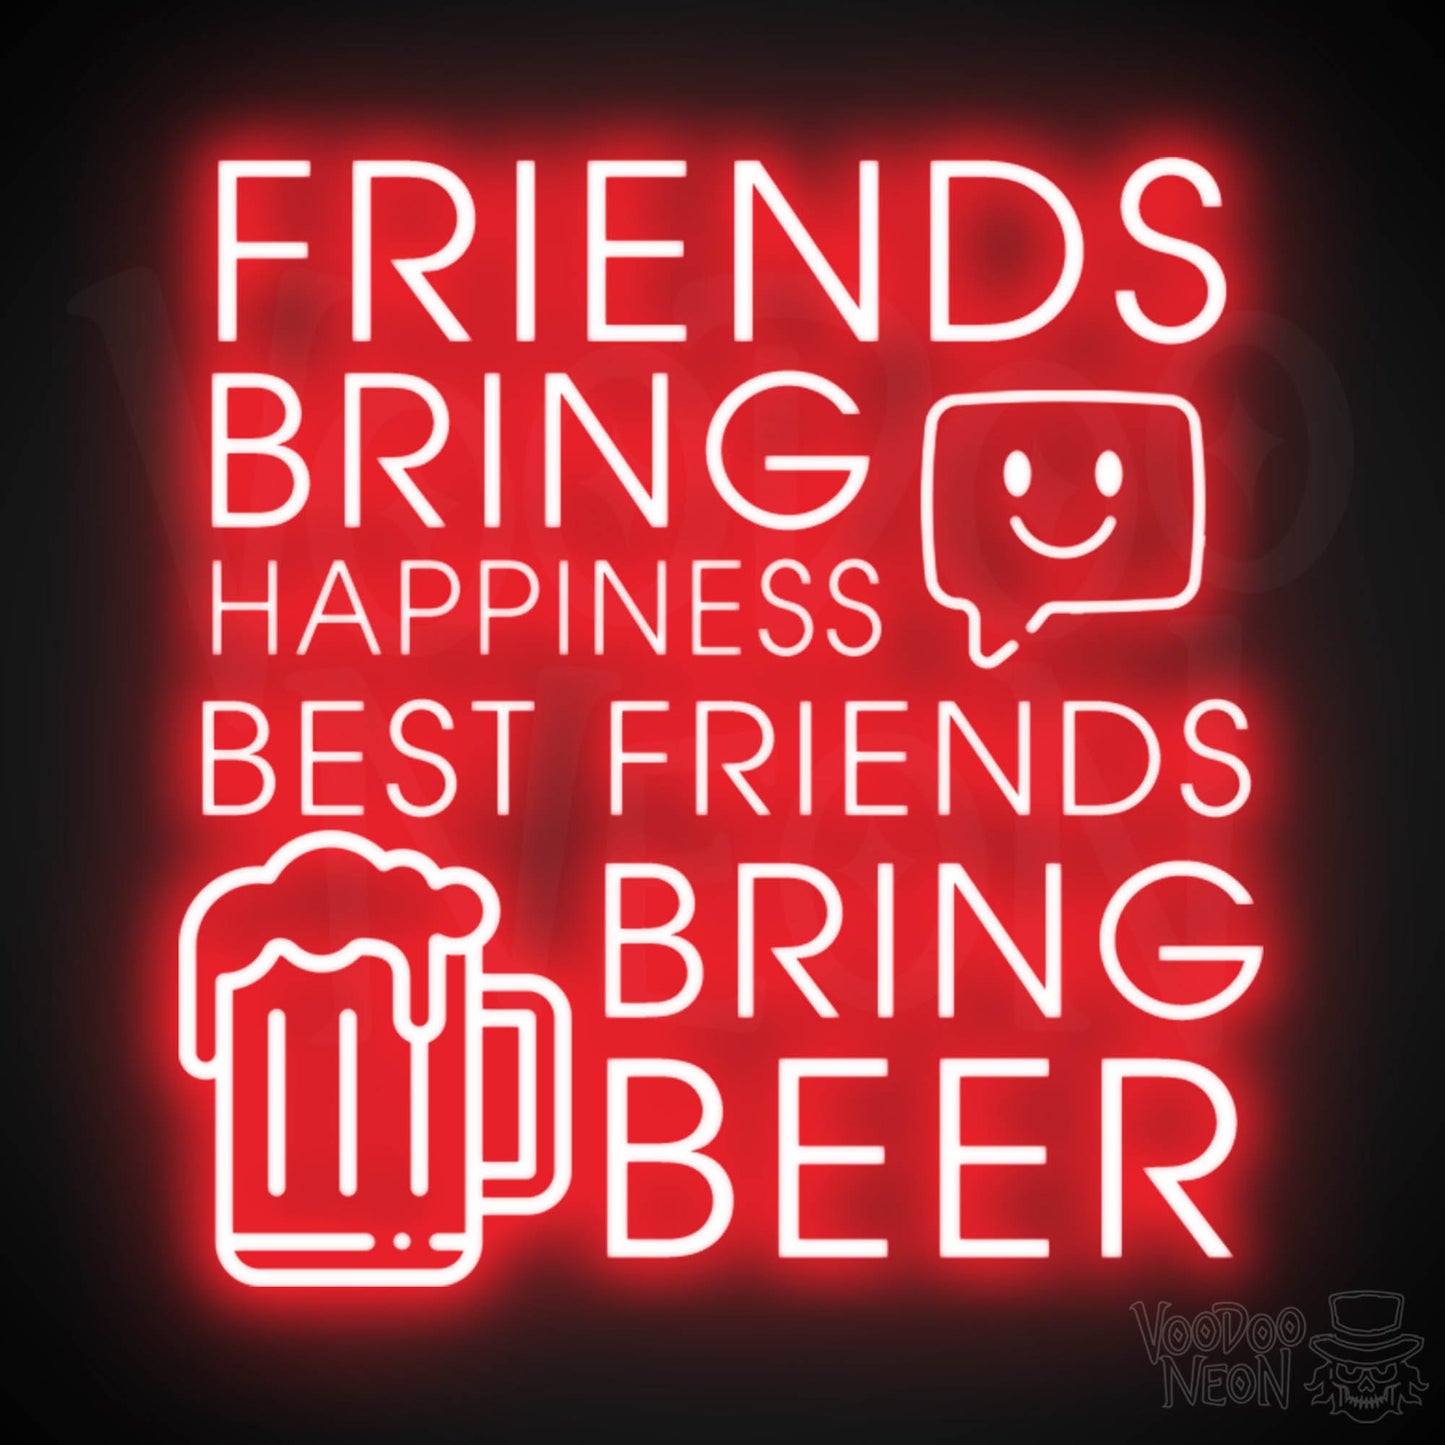 Friends Bring Happiness Best Friends Bring Beer Neon Sign - LED Lights Wall Art - Color Red